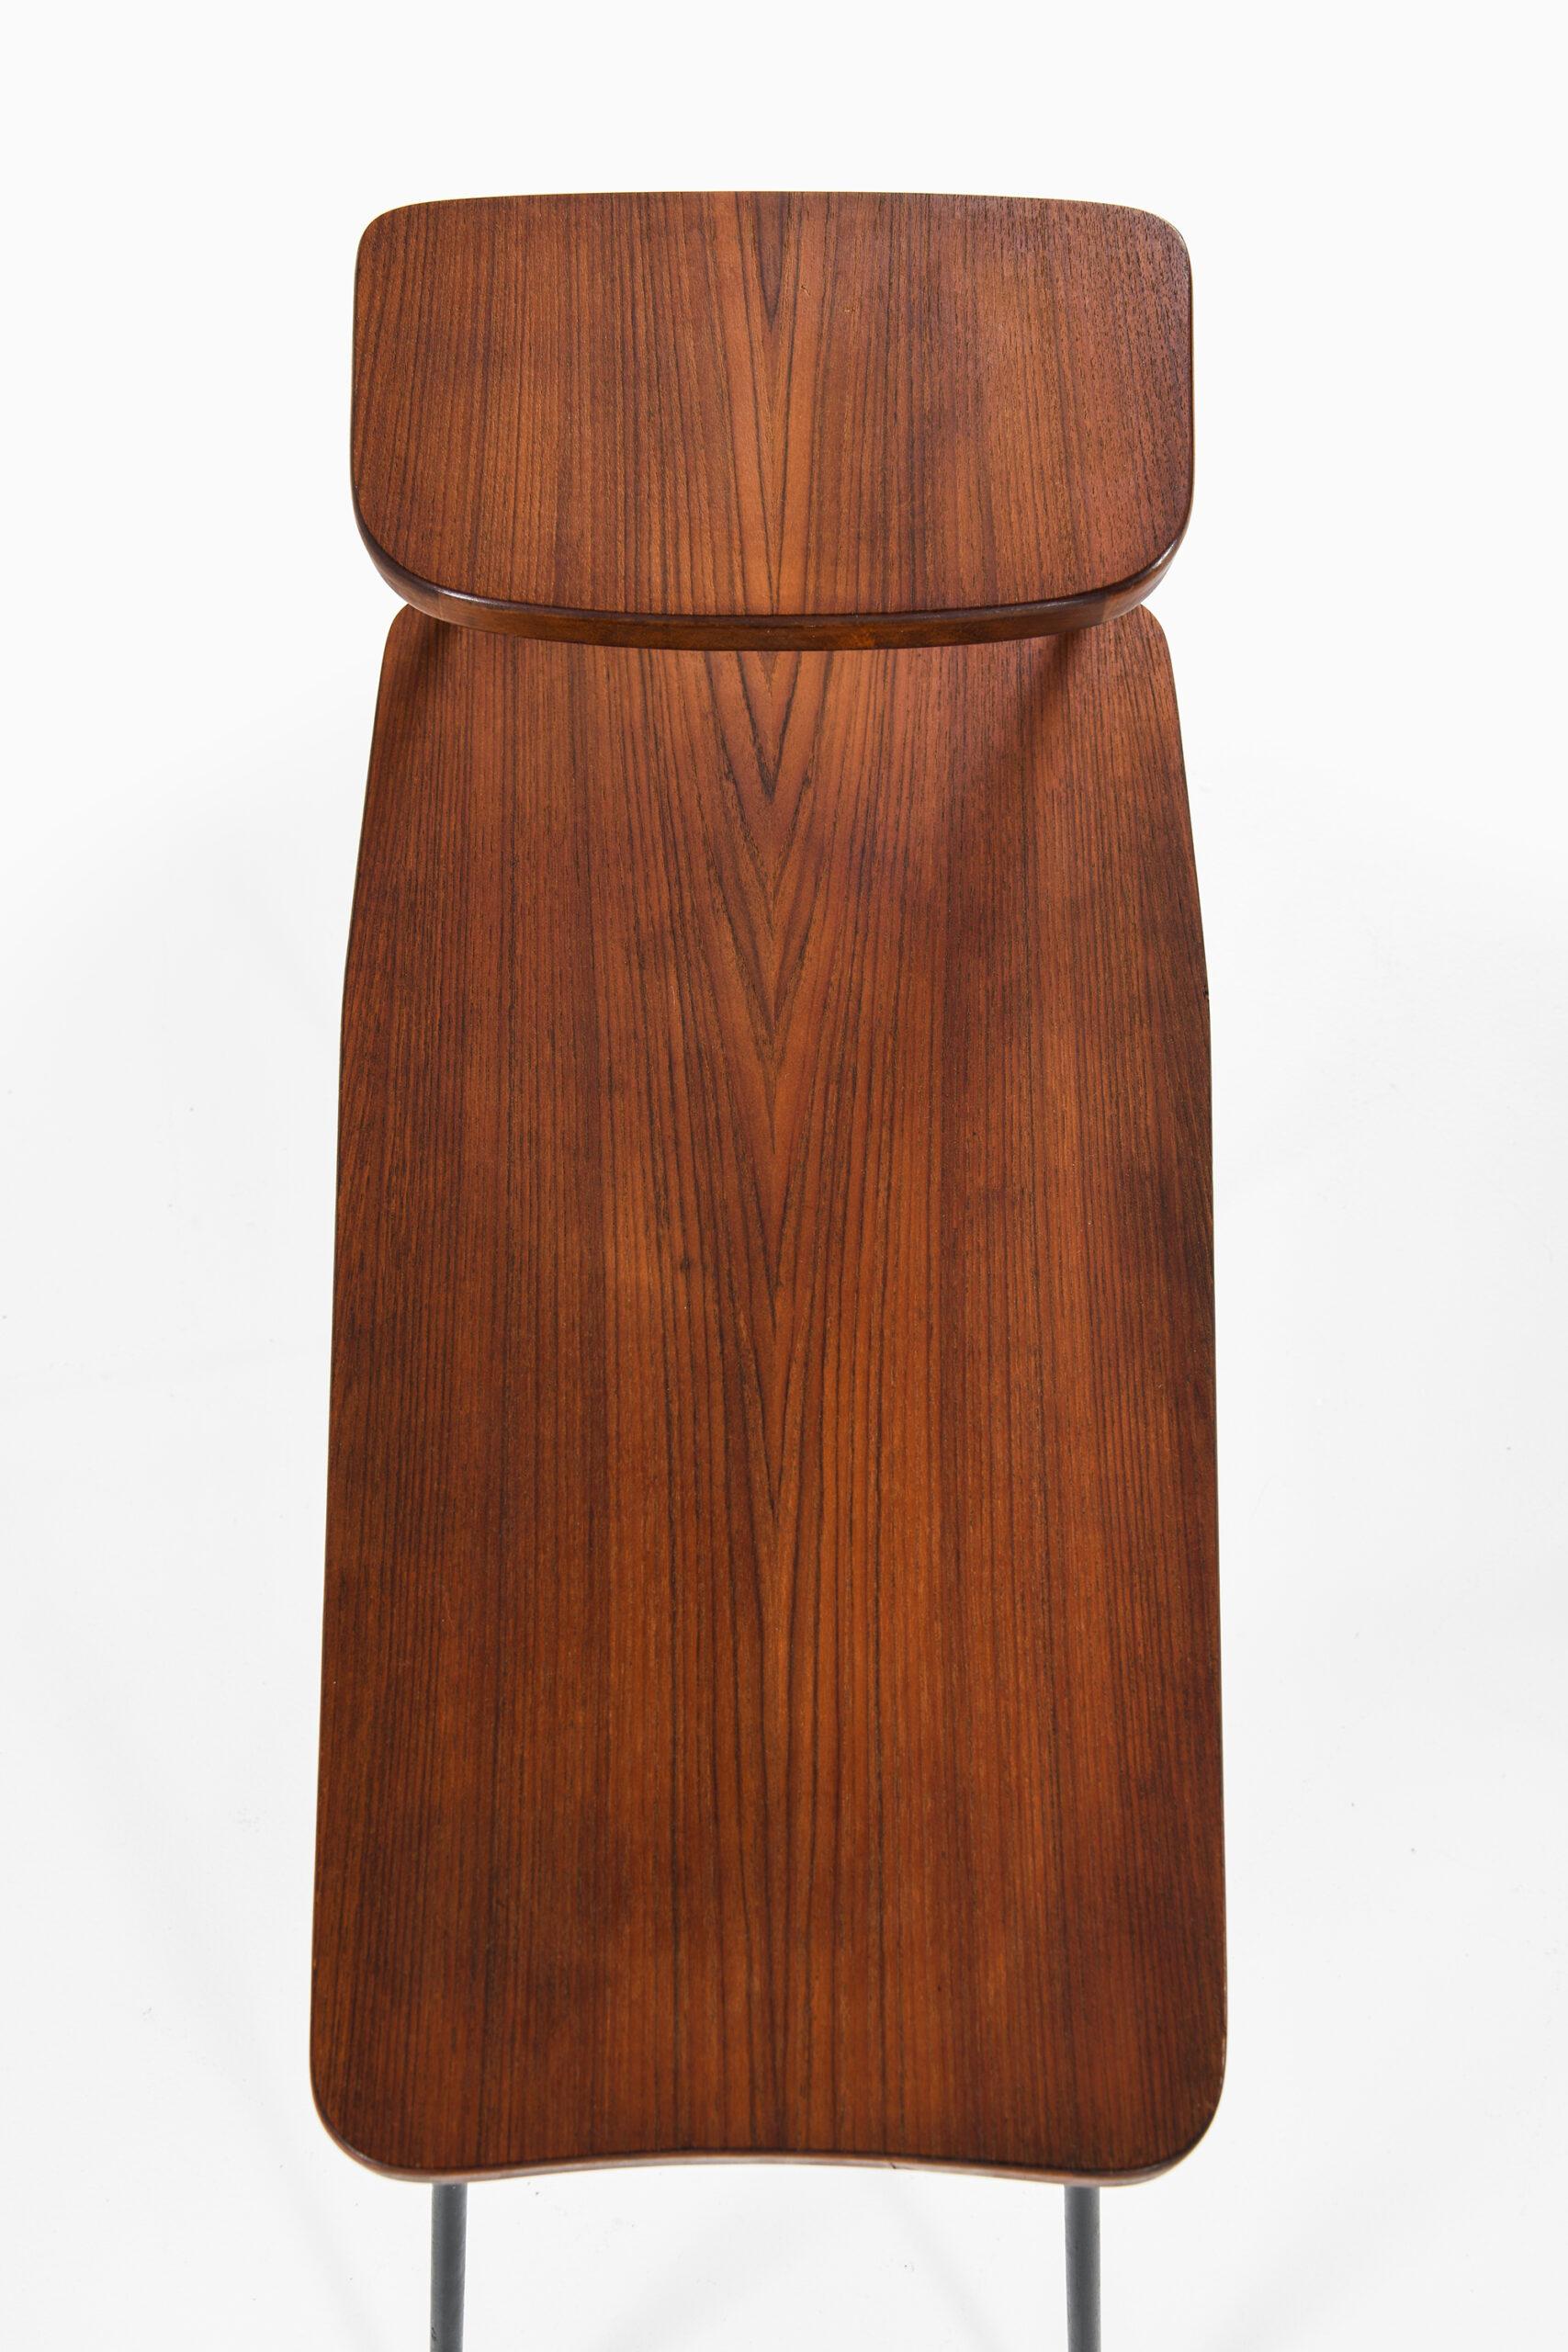 Teak Side Tables in the Style of Greta Magnusson Grossman